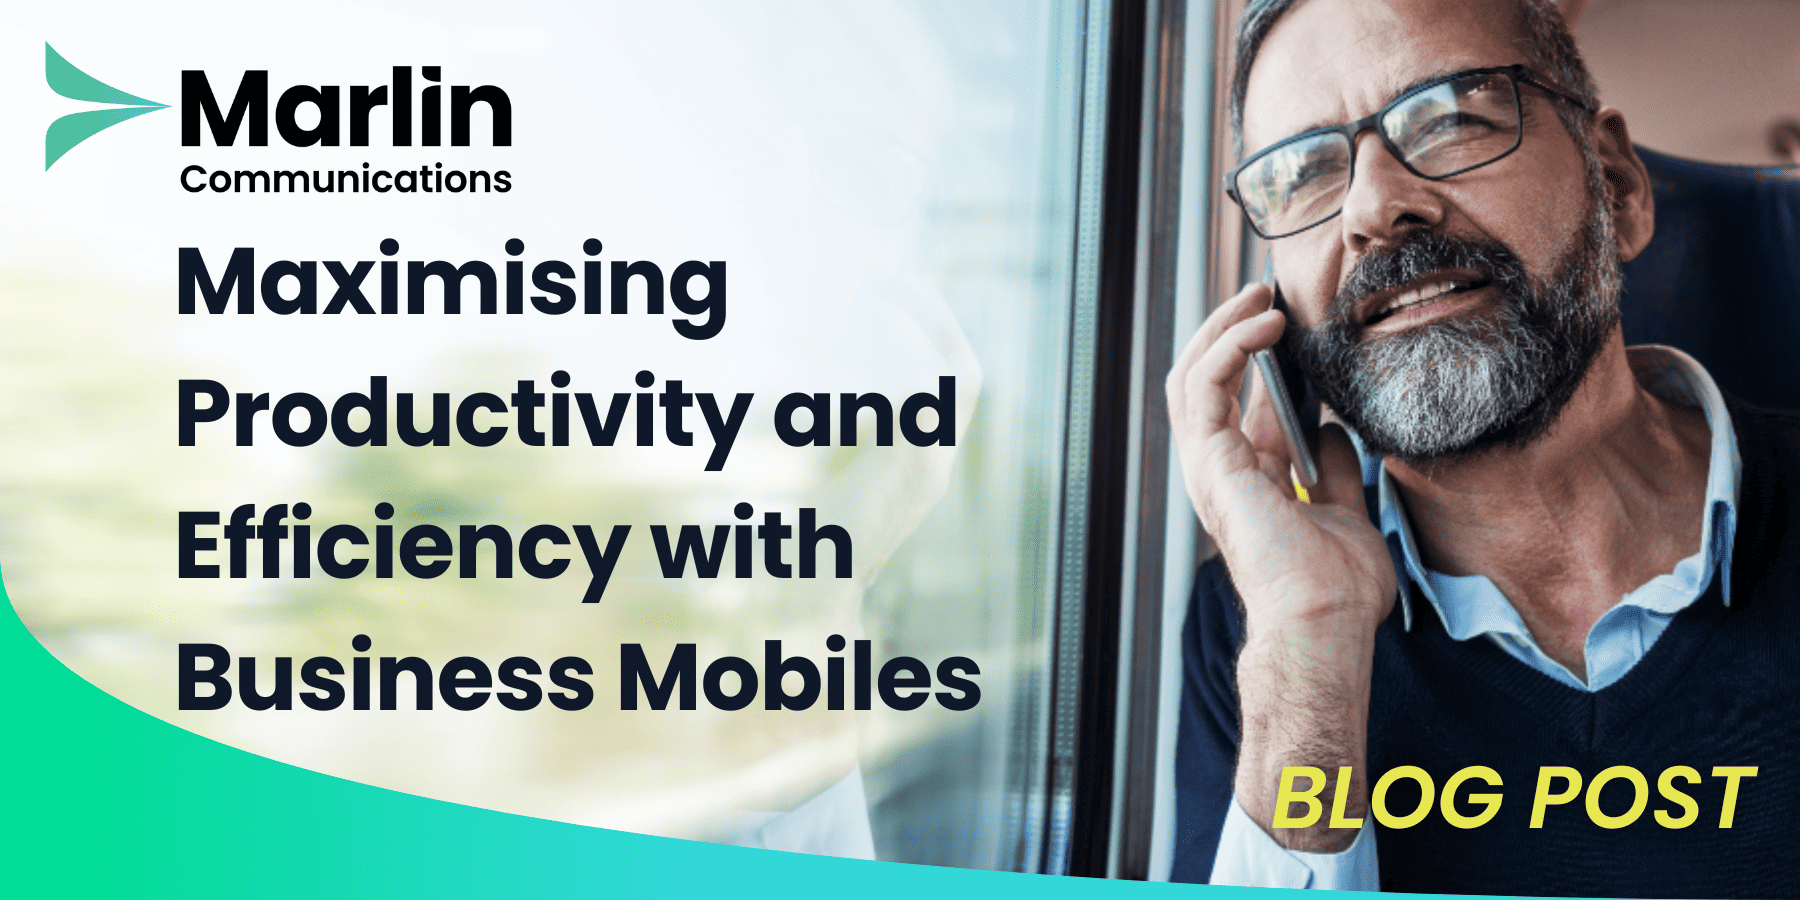 Blog Post: Maximising Productivity with Business Mobiles